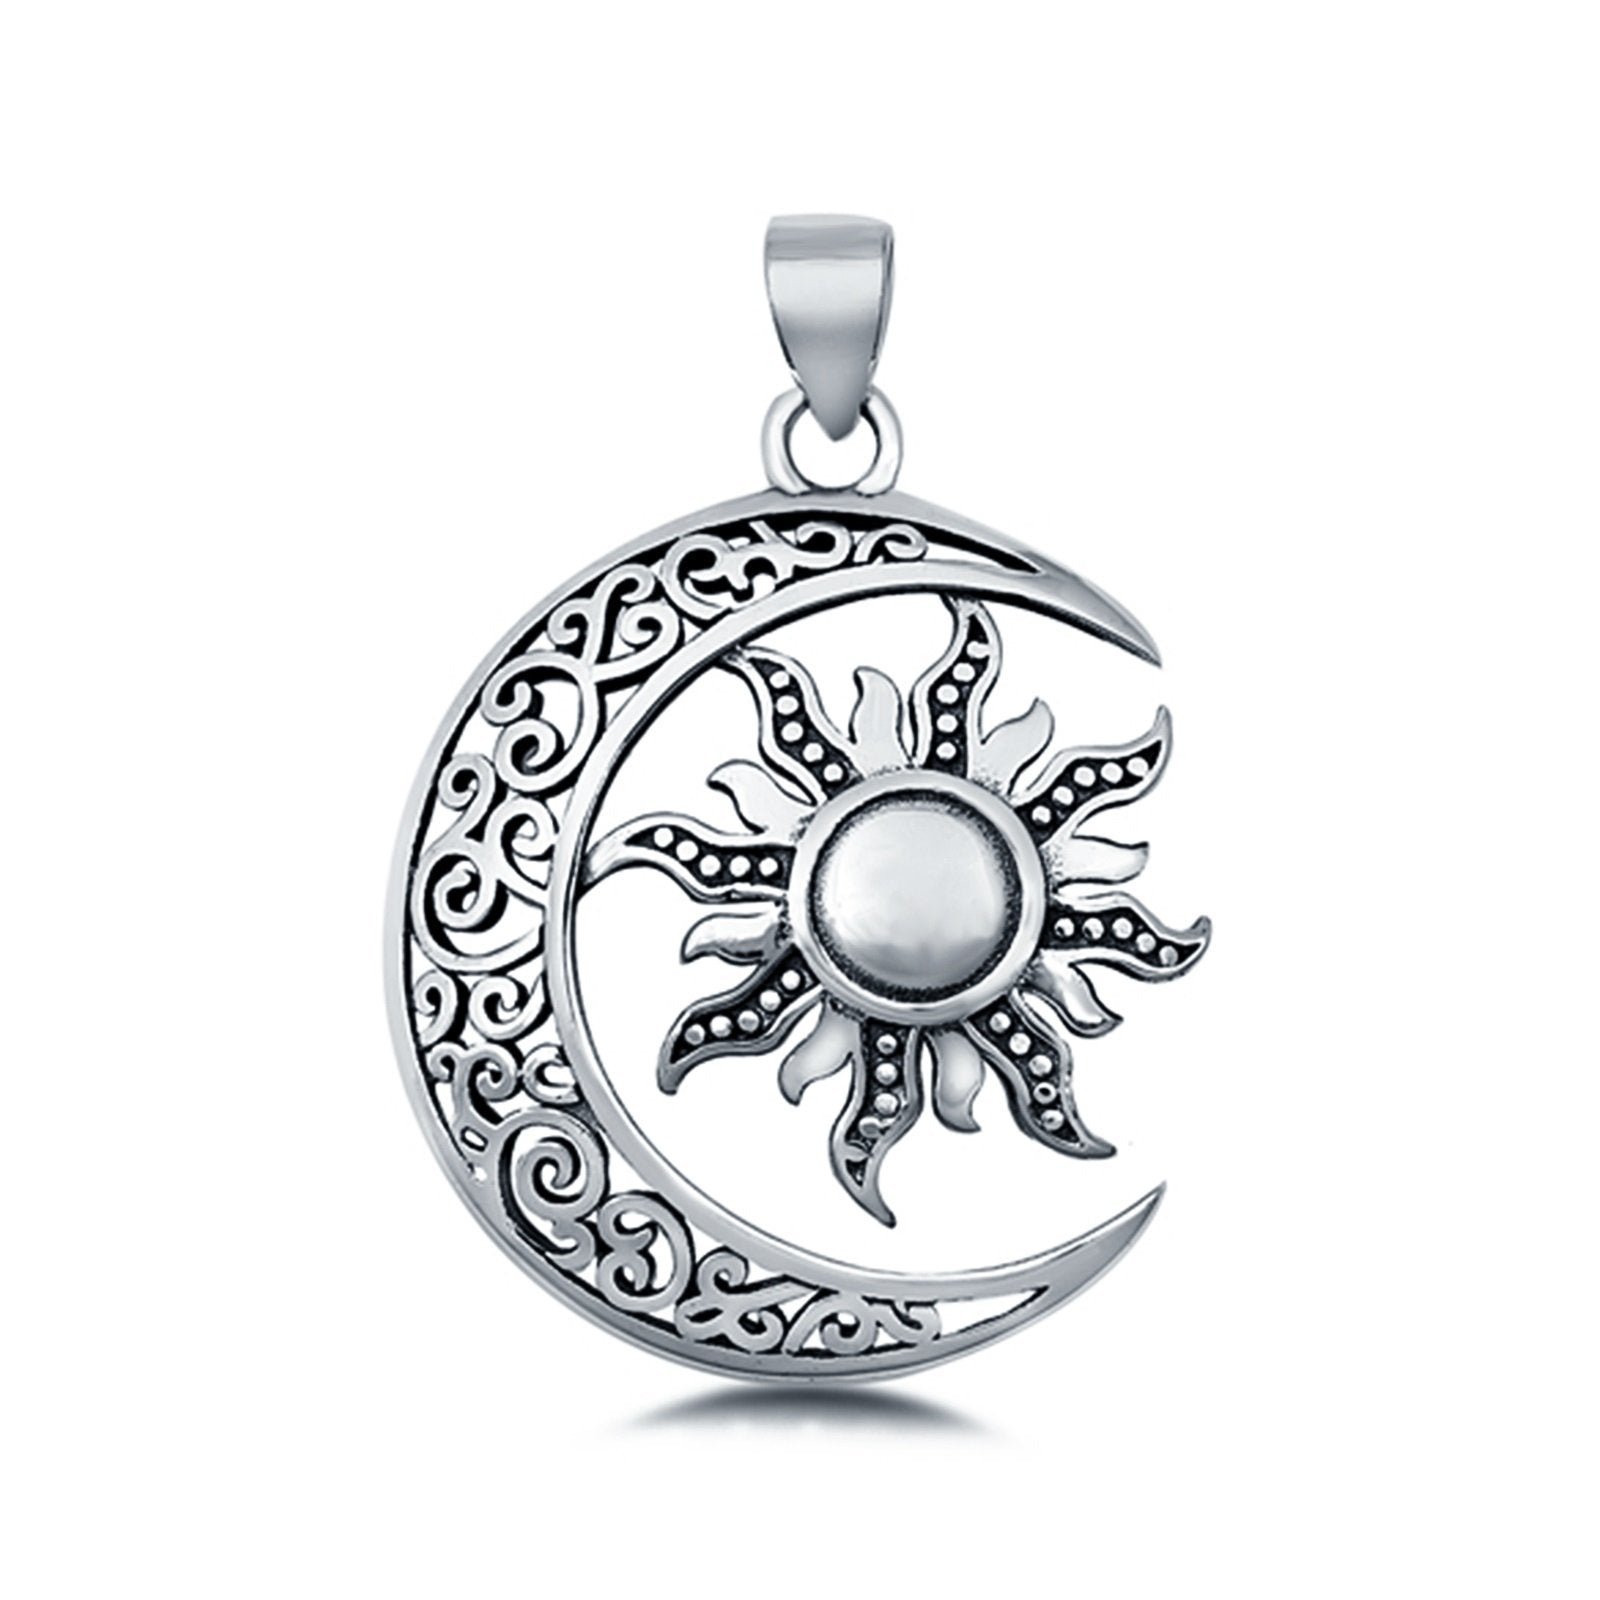 Silver Moon and Sun Pendant Charm 925 Sterling Silver (28mm)